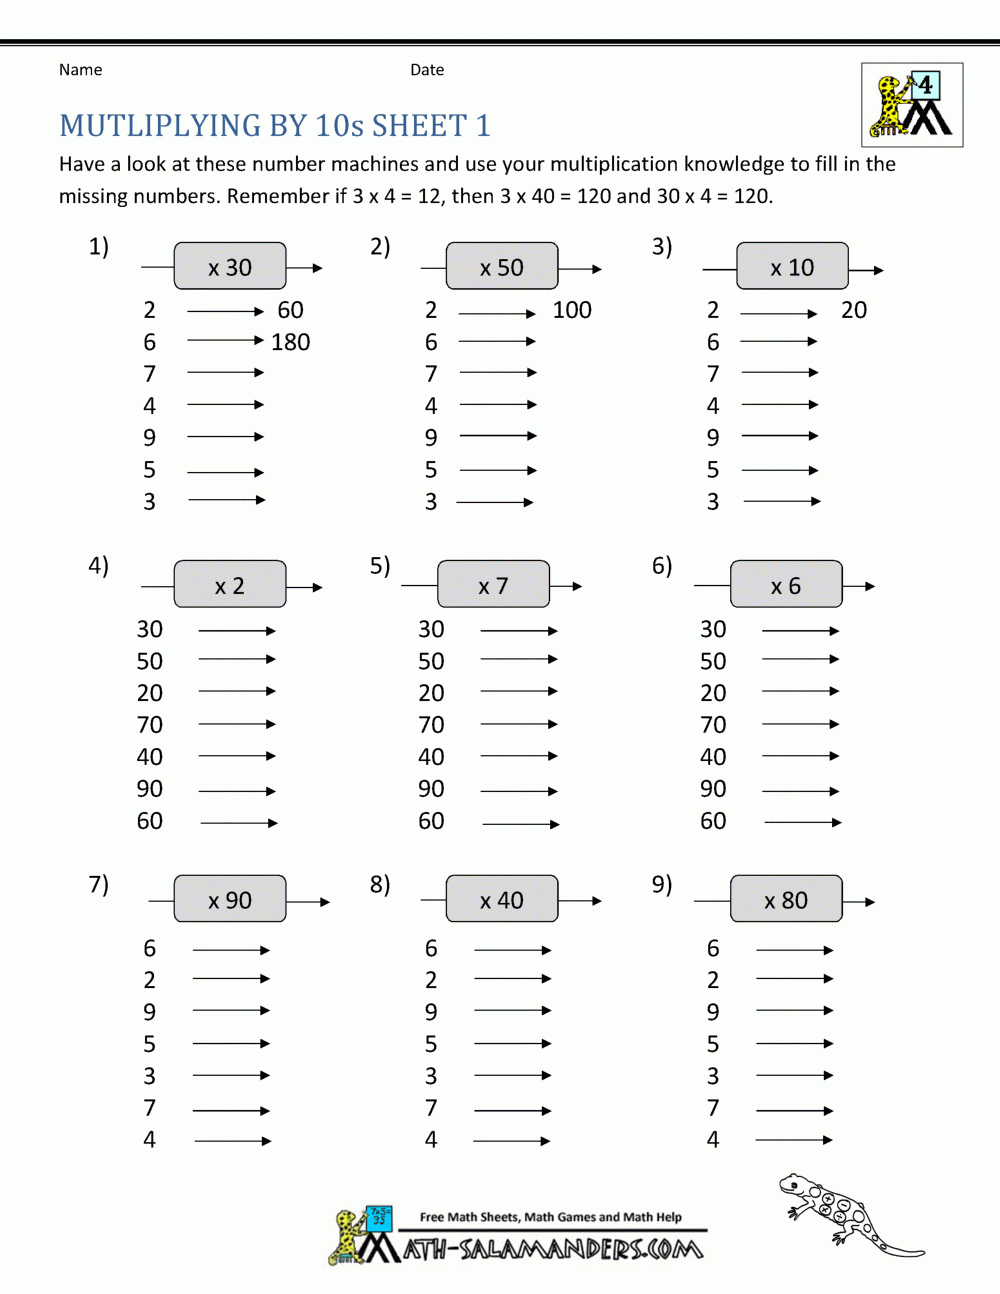 Multiplication Fact Sheets intended for Printable Multiplication Facts